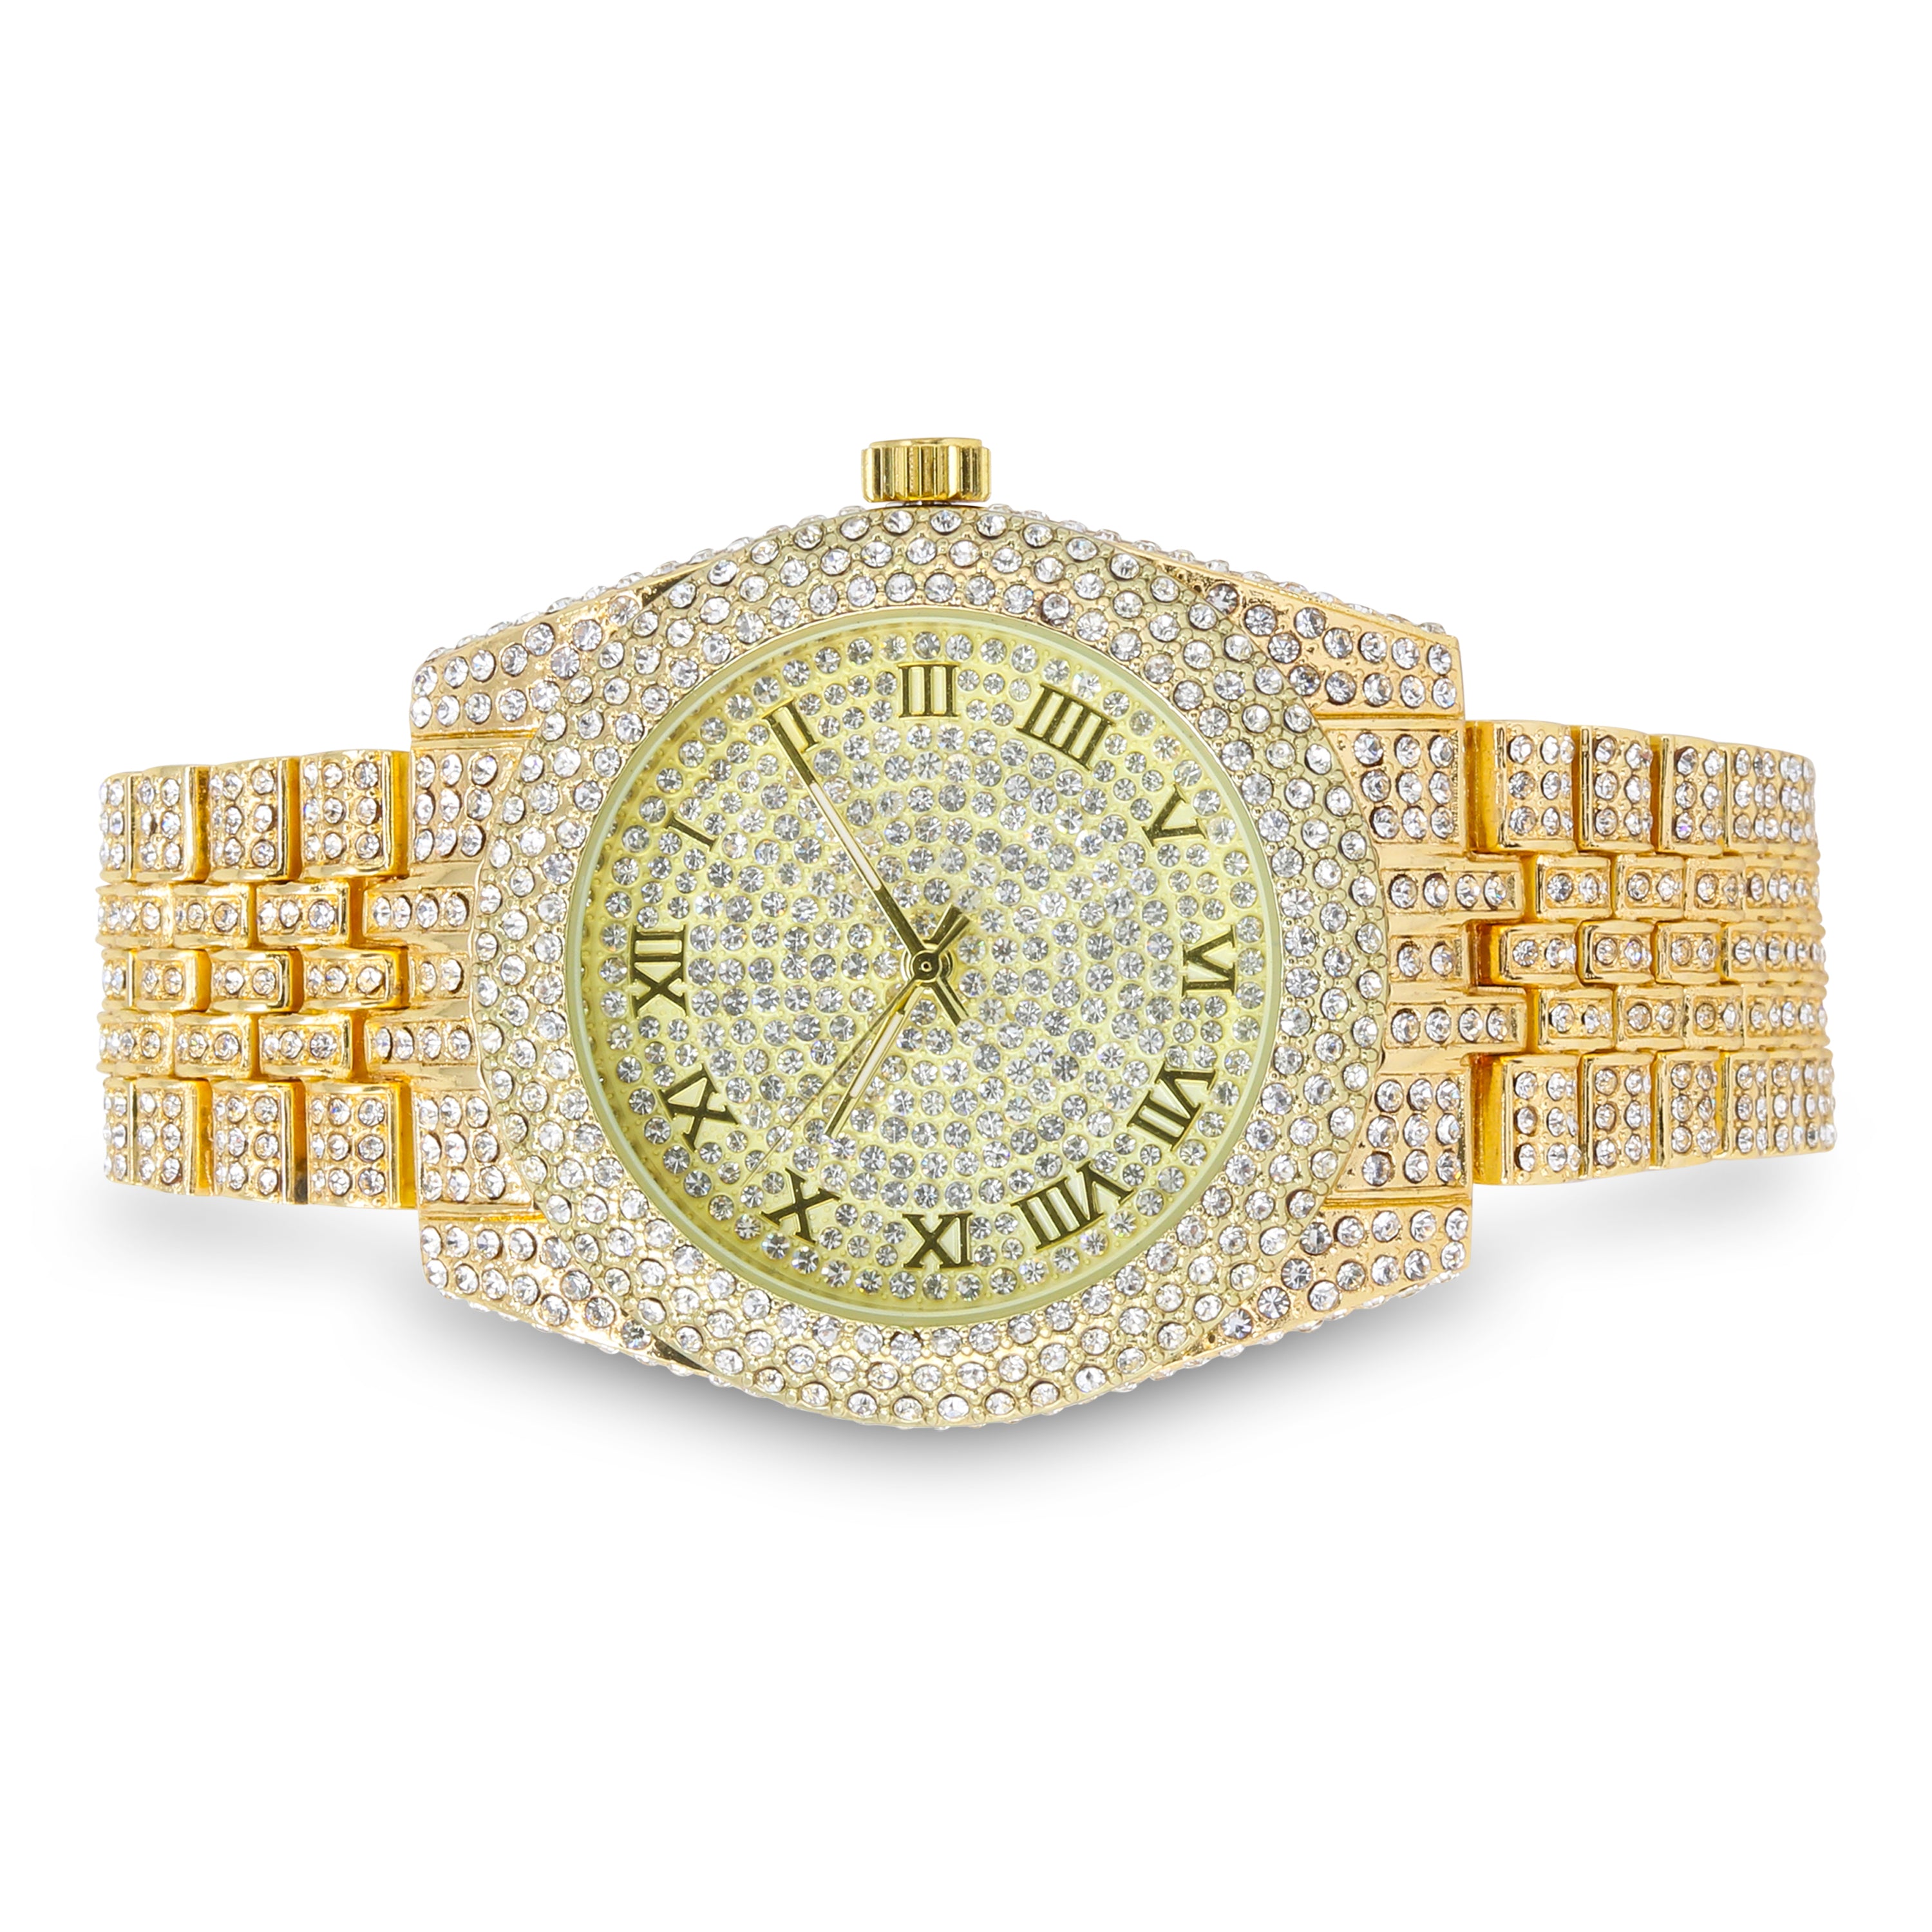 Women's Round Iced Out Watch 43mm Gold - Roman Dial